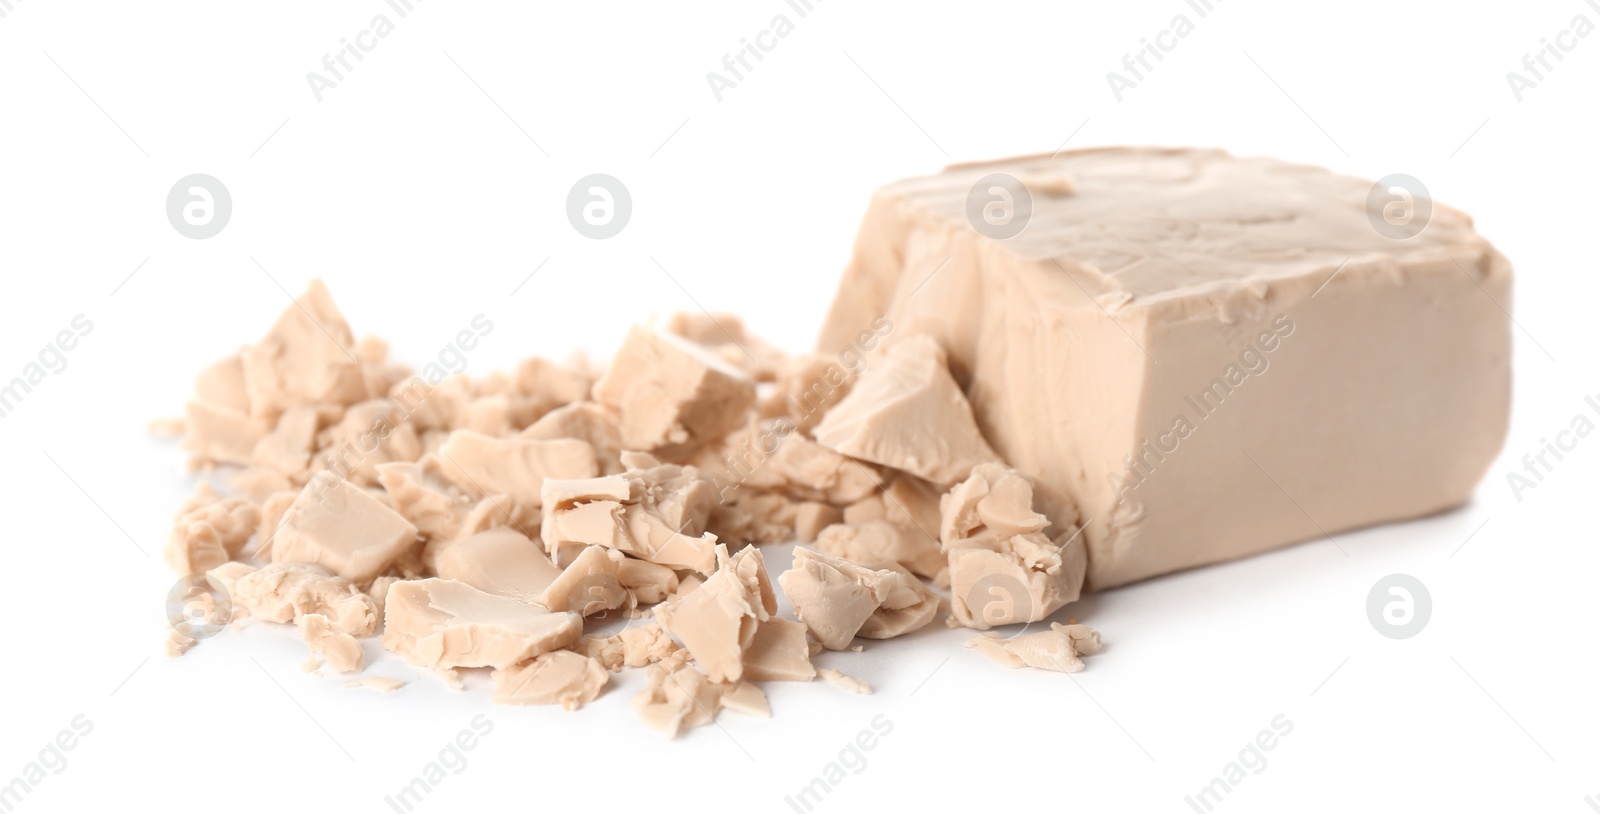 Photo of Crumbled block of compressed yeast on white background